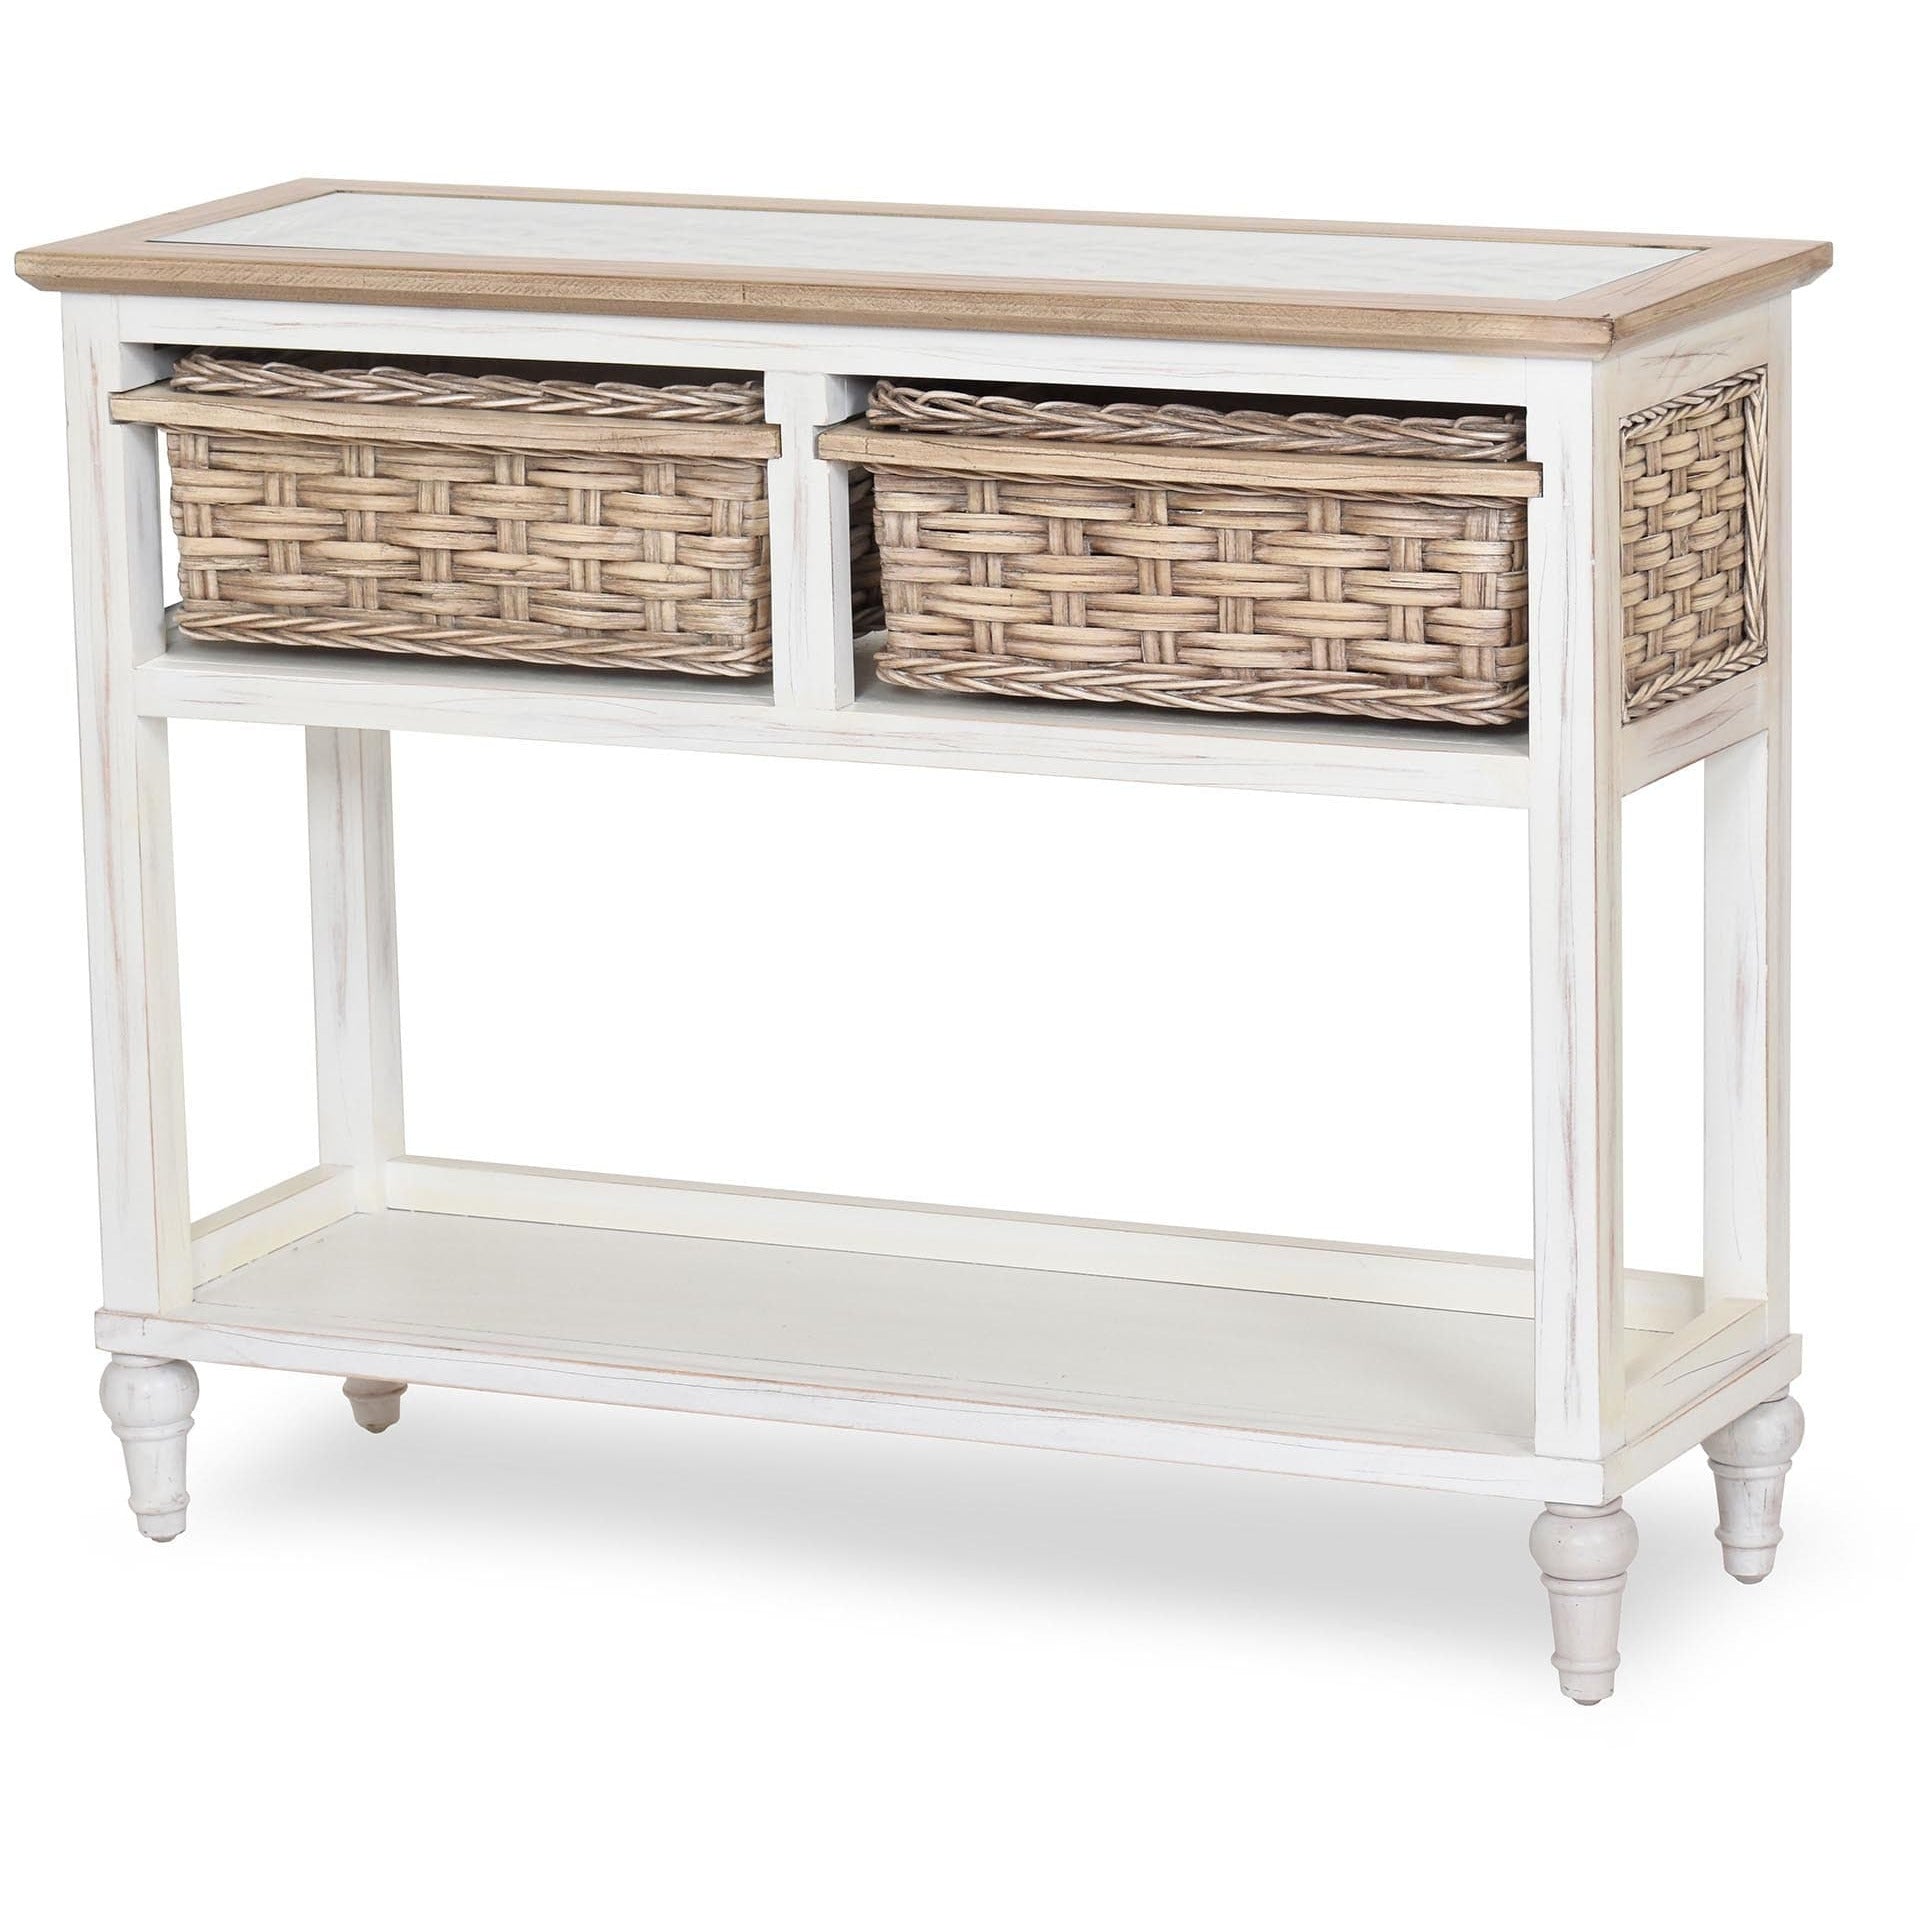 Sea Winds Trading Island Breeze 2-Basket Console Table B59103 Indoor Sea Winds Trading Co 